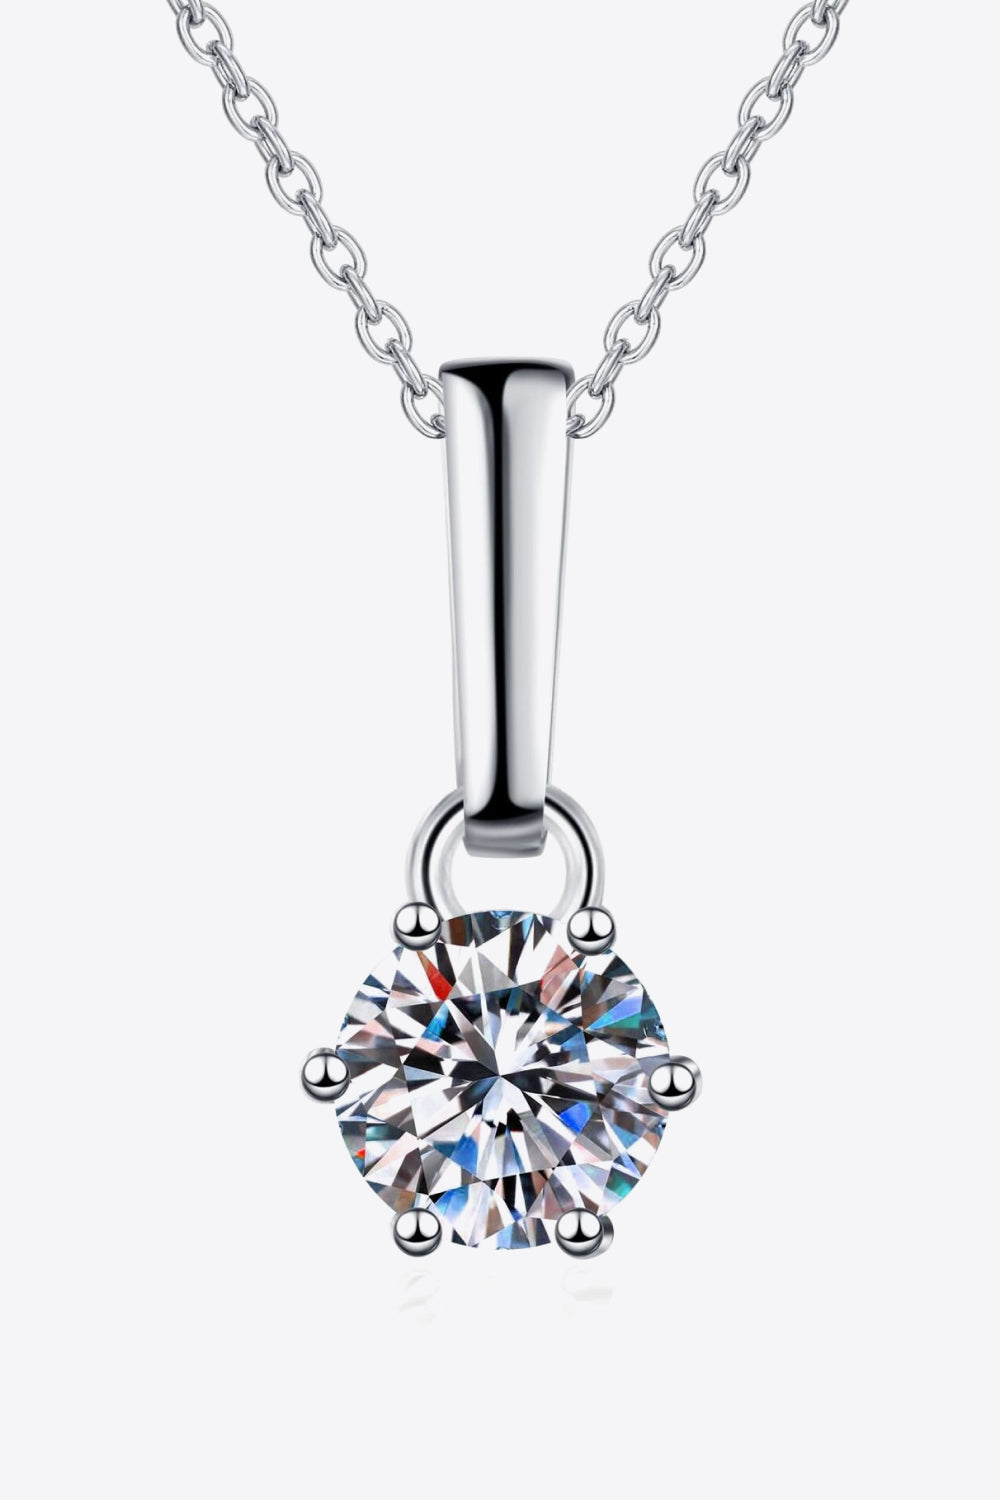 1 Carat Moissanite 925 Sterling Silver Chain-Link Necklace-Necklaces-Inspired by Justeen-Women's Clothing Boutique in Chicago, Illinois